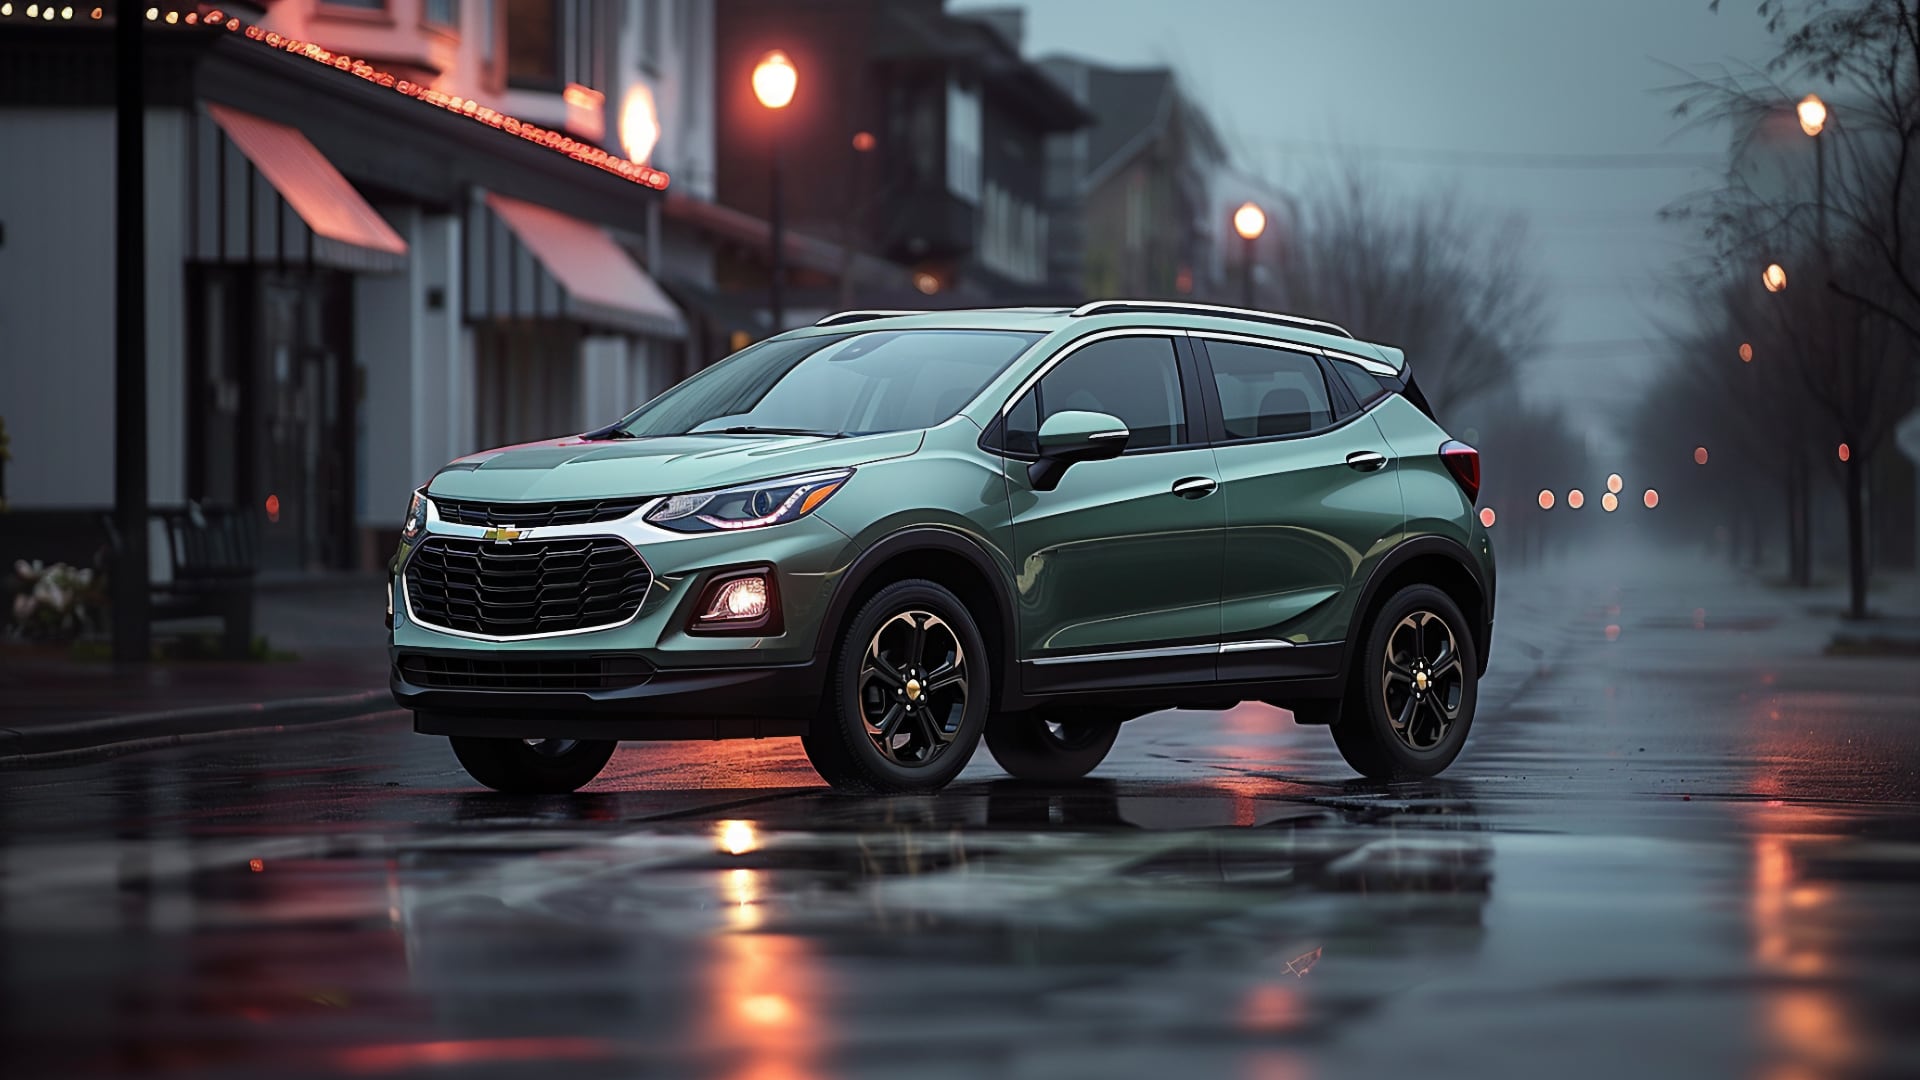 The 2019 Chevy Trax, one of the years to avoid, is parked on a wet street.